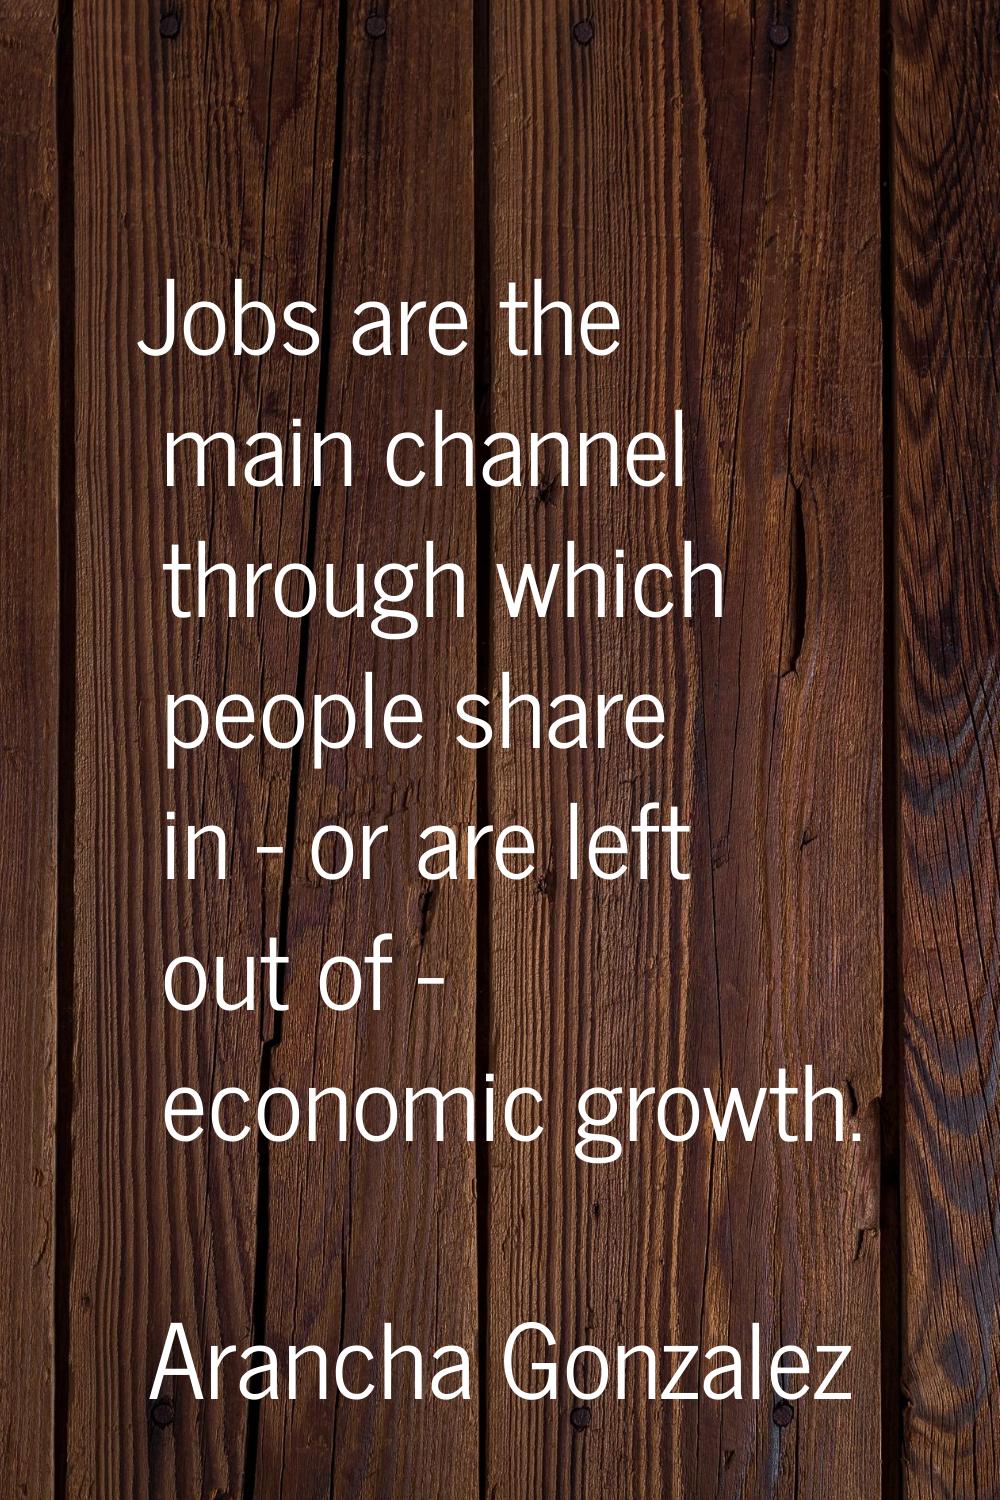 Jobs are the main channel through which people share in - or are left out of - economic growth.